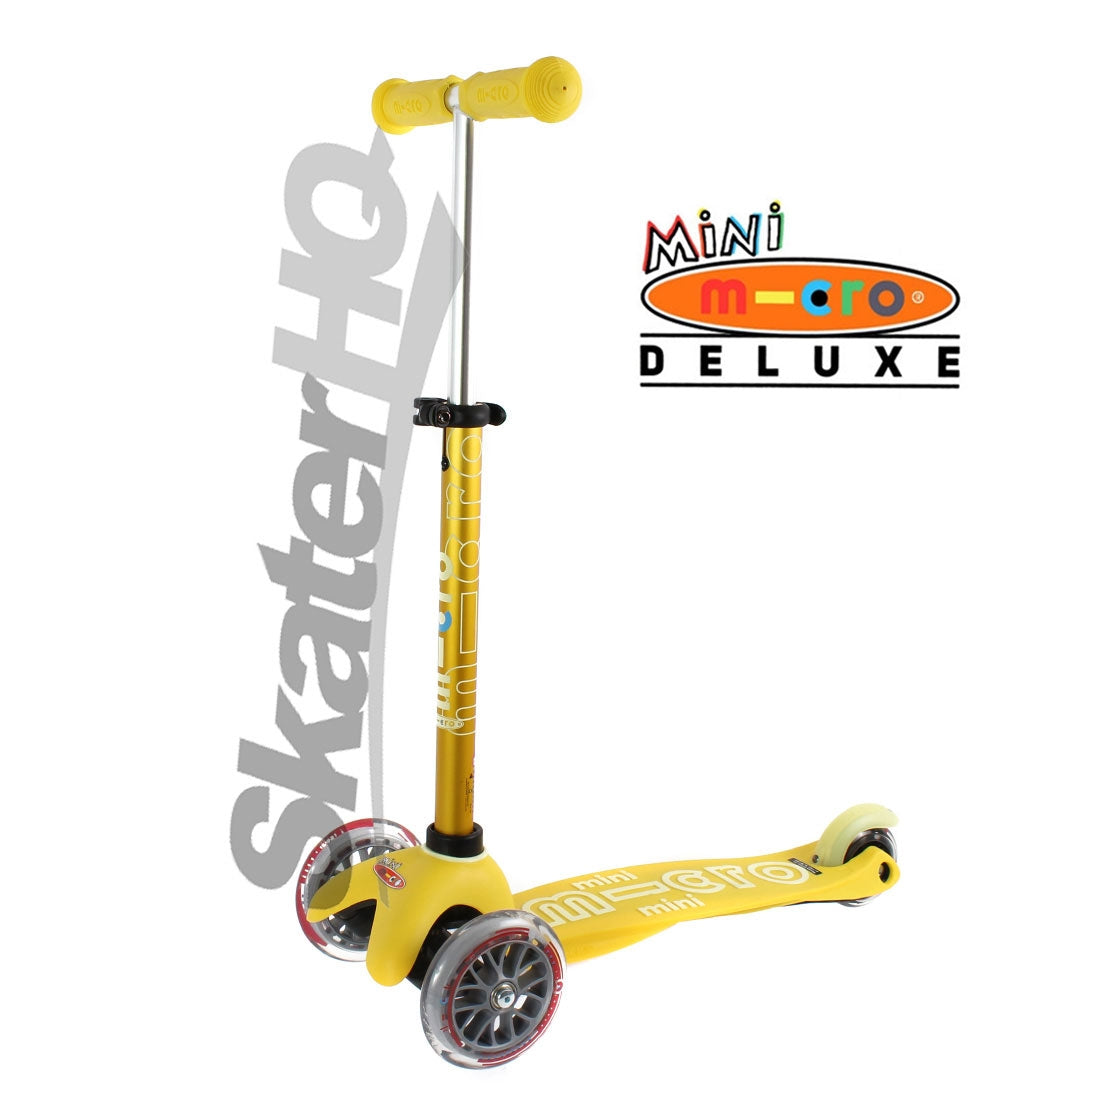 Micro Mini Deluxe Scooter - Yellow Scooter Completes Rec